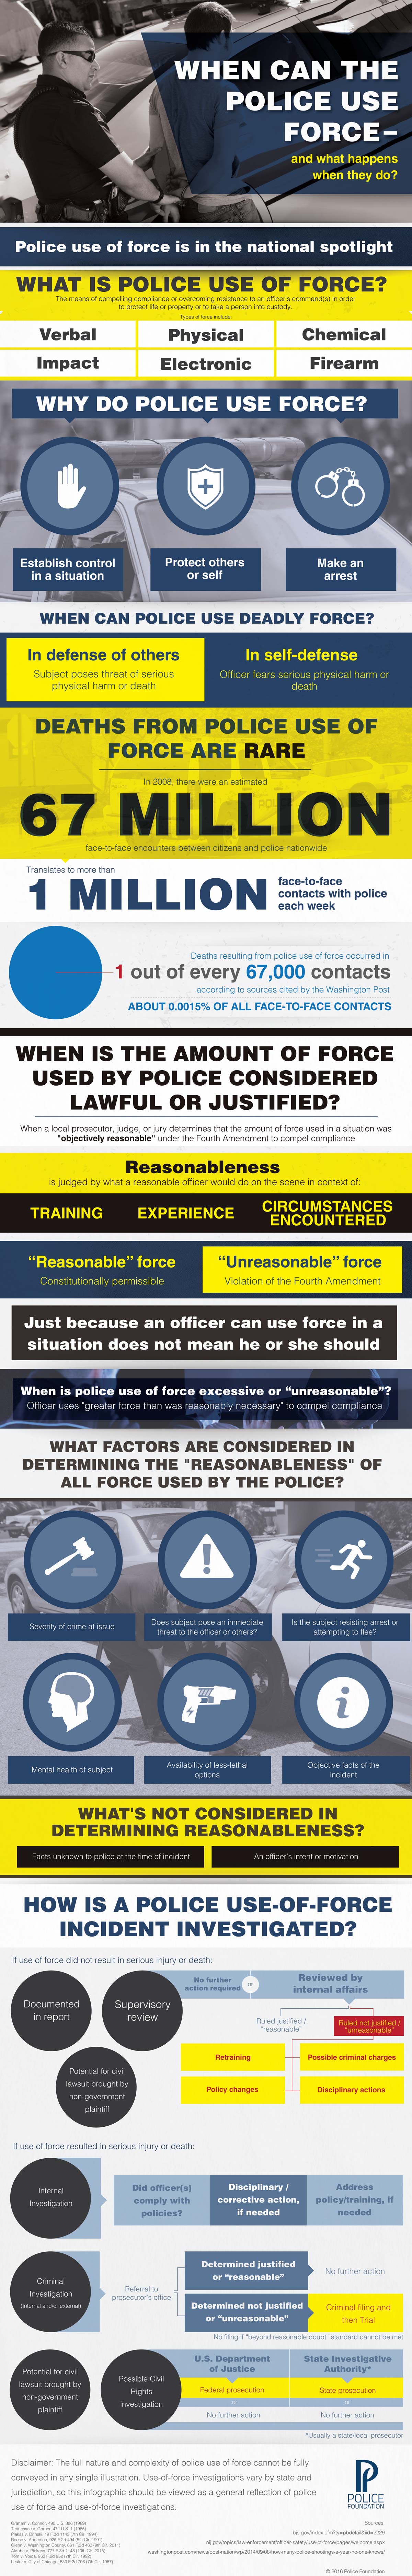 When Can The Police Use Force?